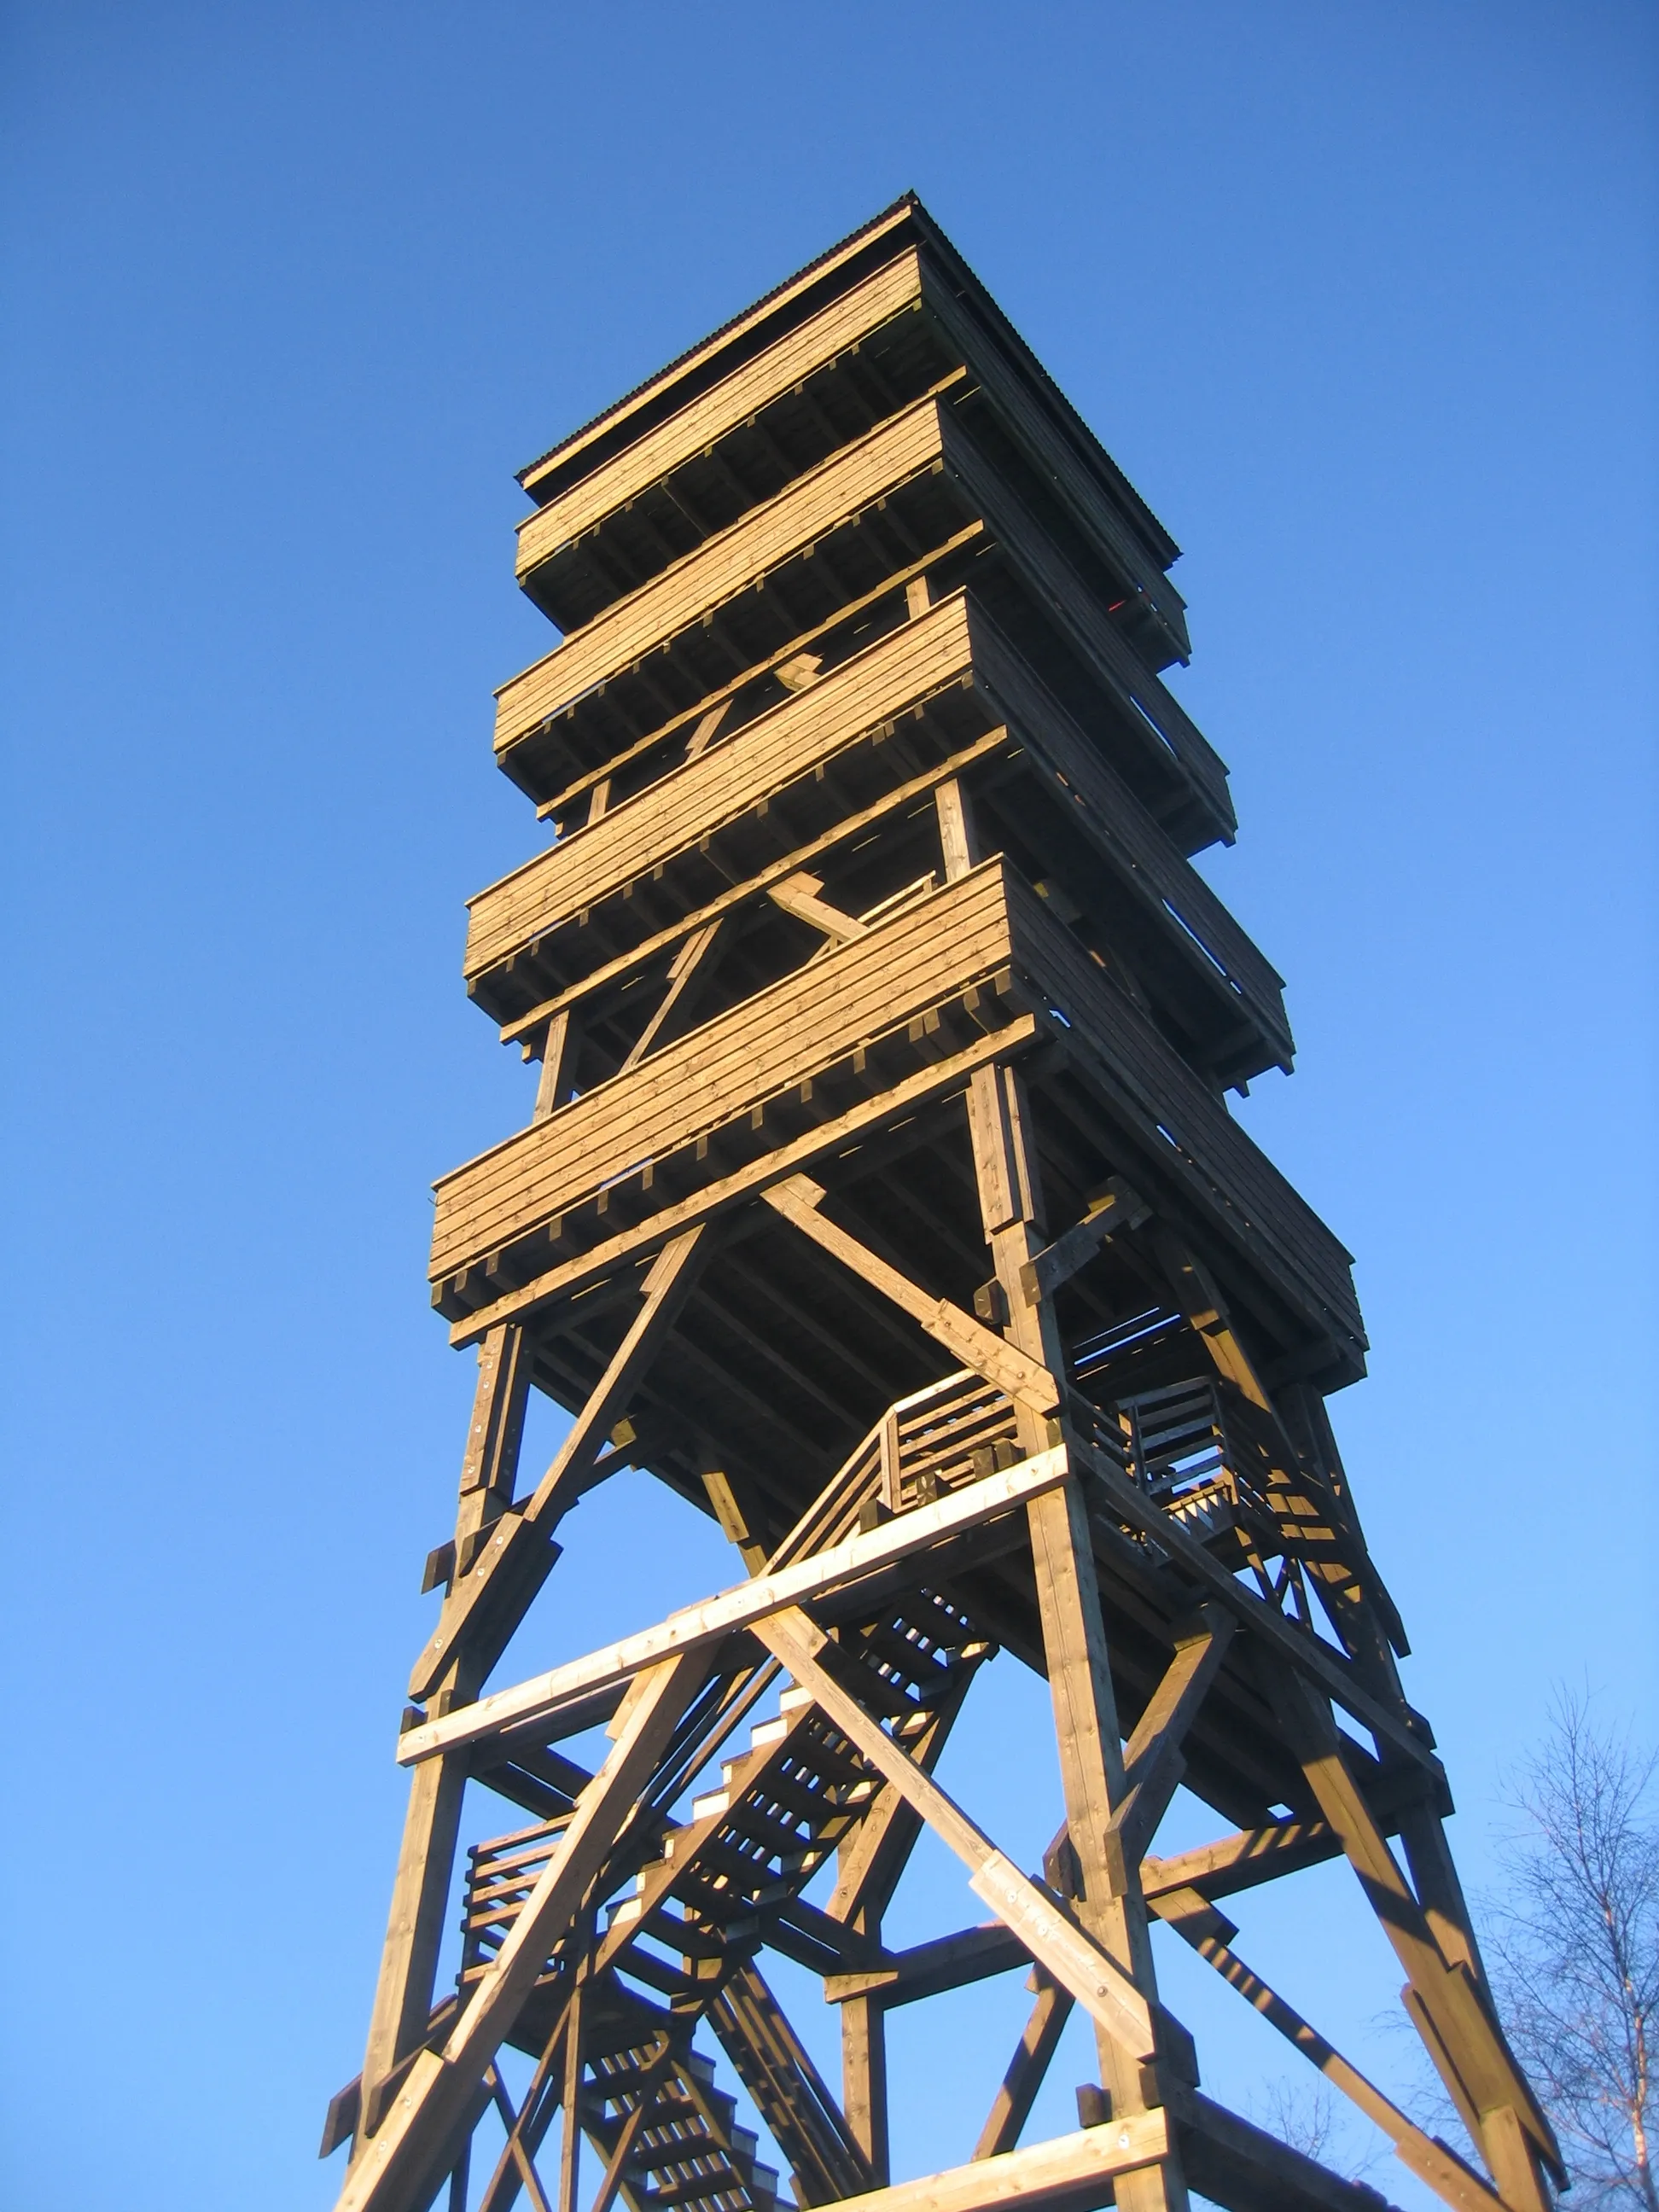 Photo showing: The wooden observation tower on the Weißer Stein, a summit in the Eifel mountains of Germany (demolished in 2011)